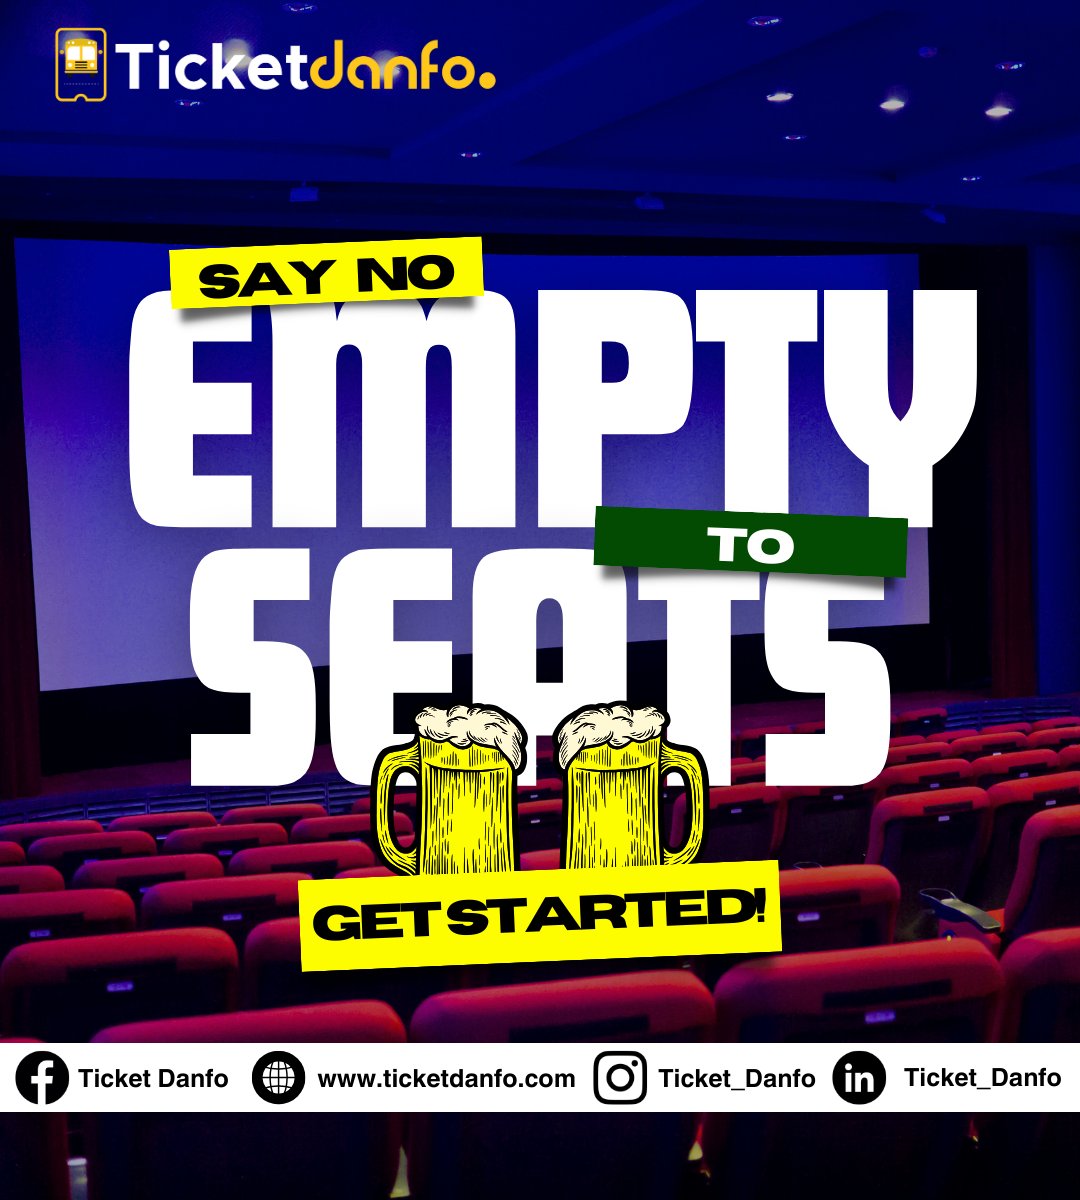 Are you tired of having unsold tickets sitting around your event? An orphaned seat can be a real pain in the ass, causing inefficiency and missing out on revenue. But don’t worry, we’re here to help!